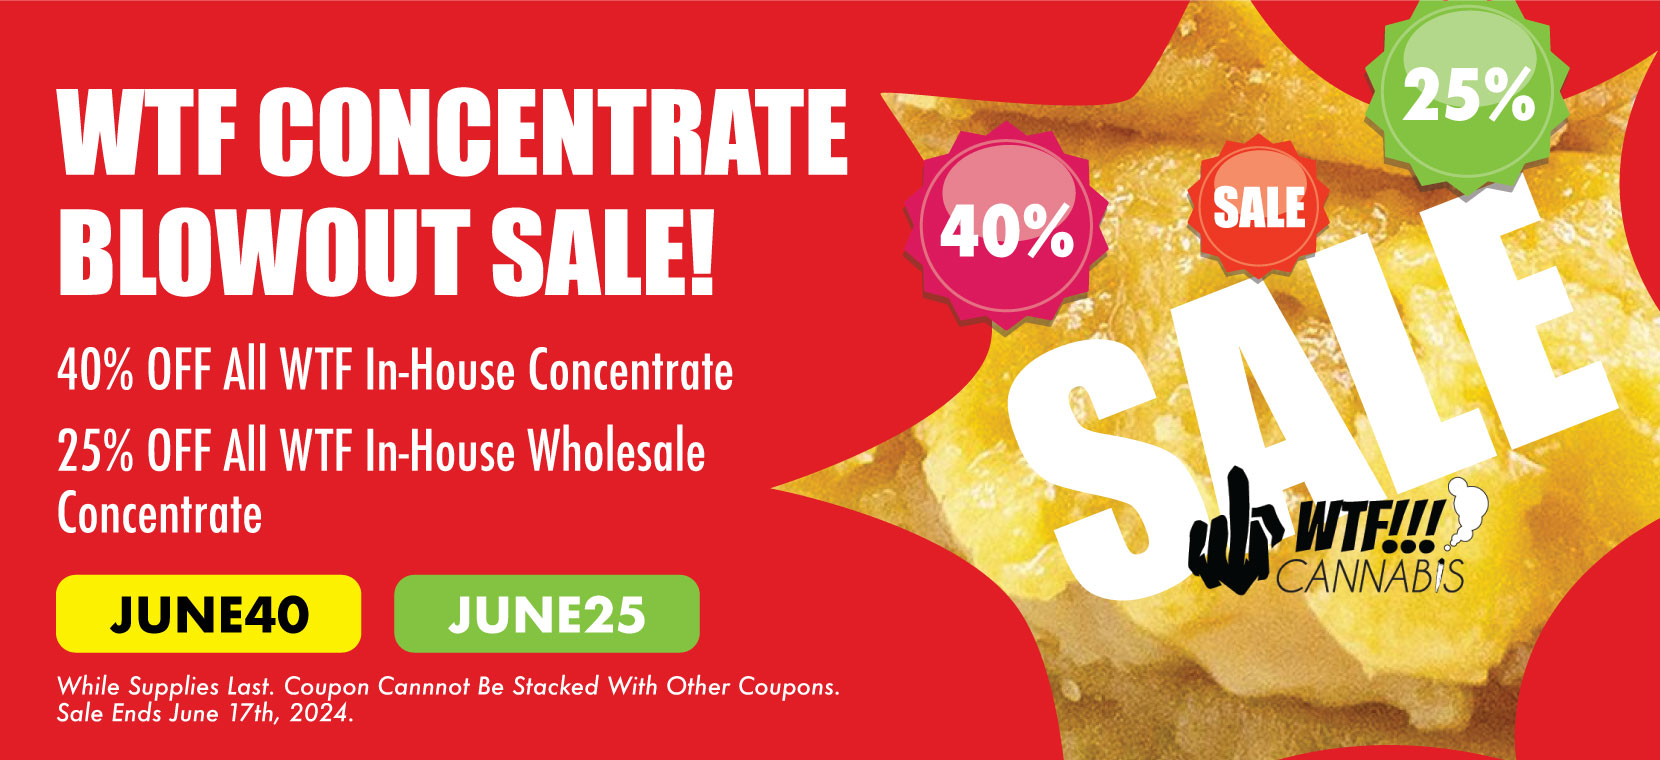 wtf concentrate banner